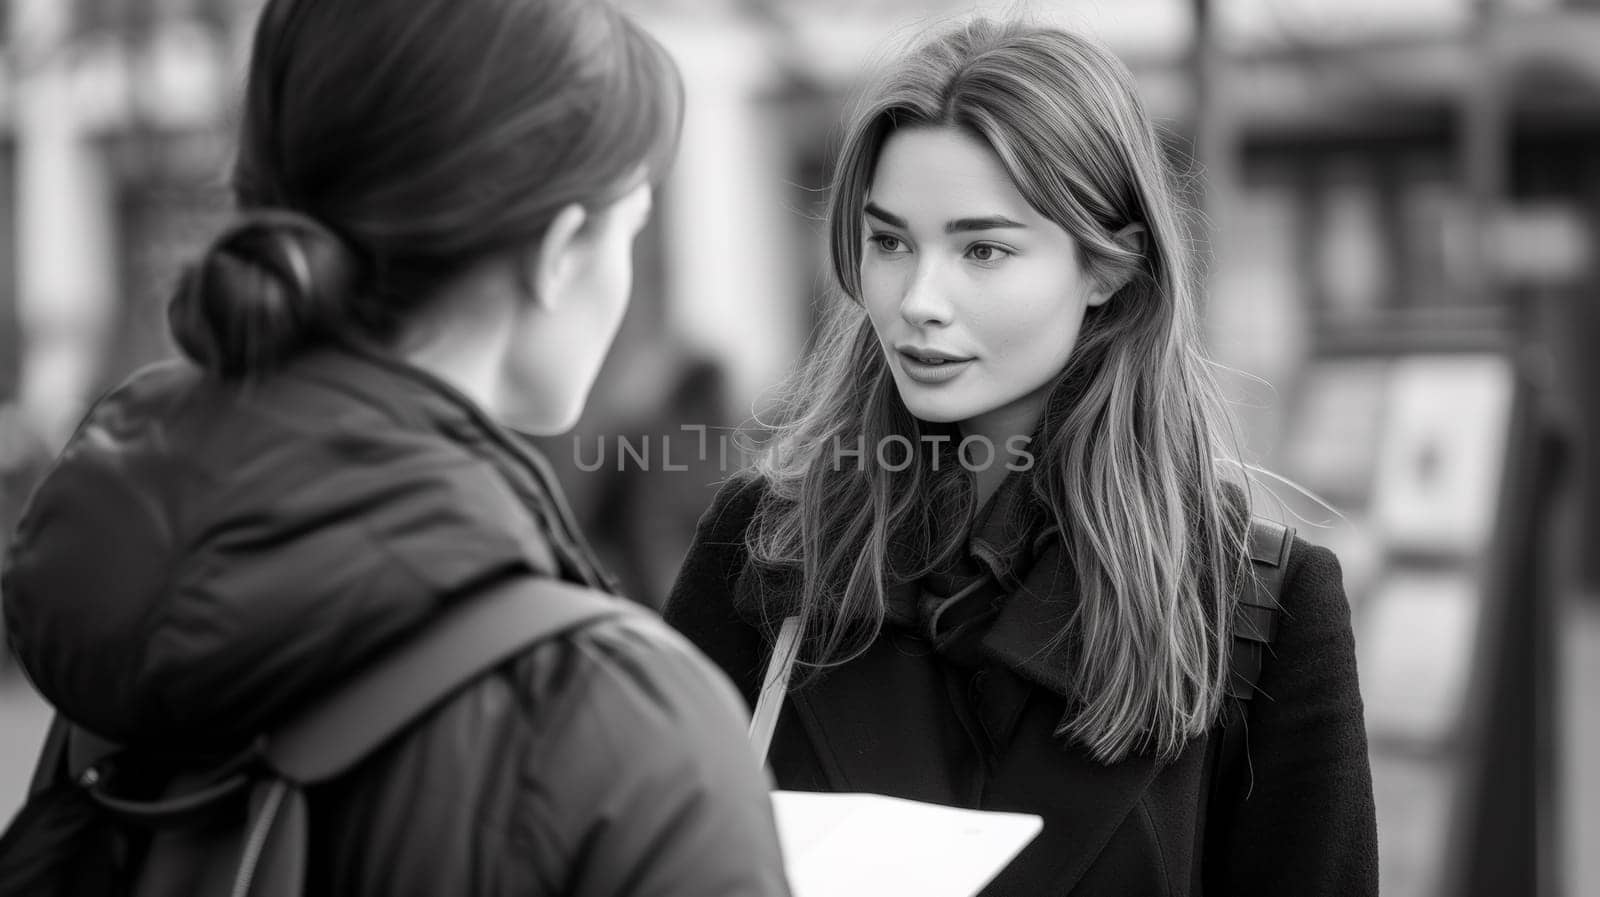 A woman talking to another person in a black and white photo